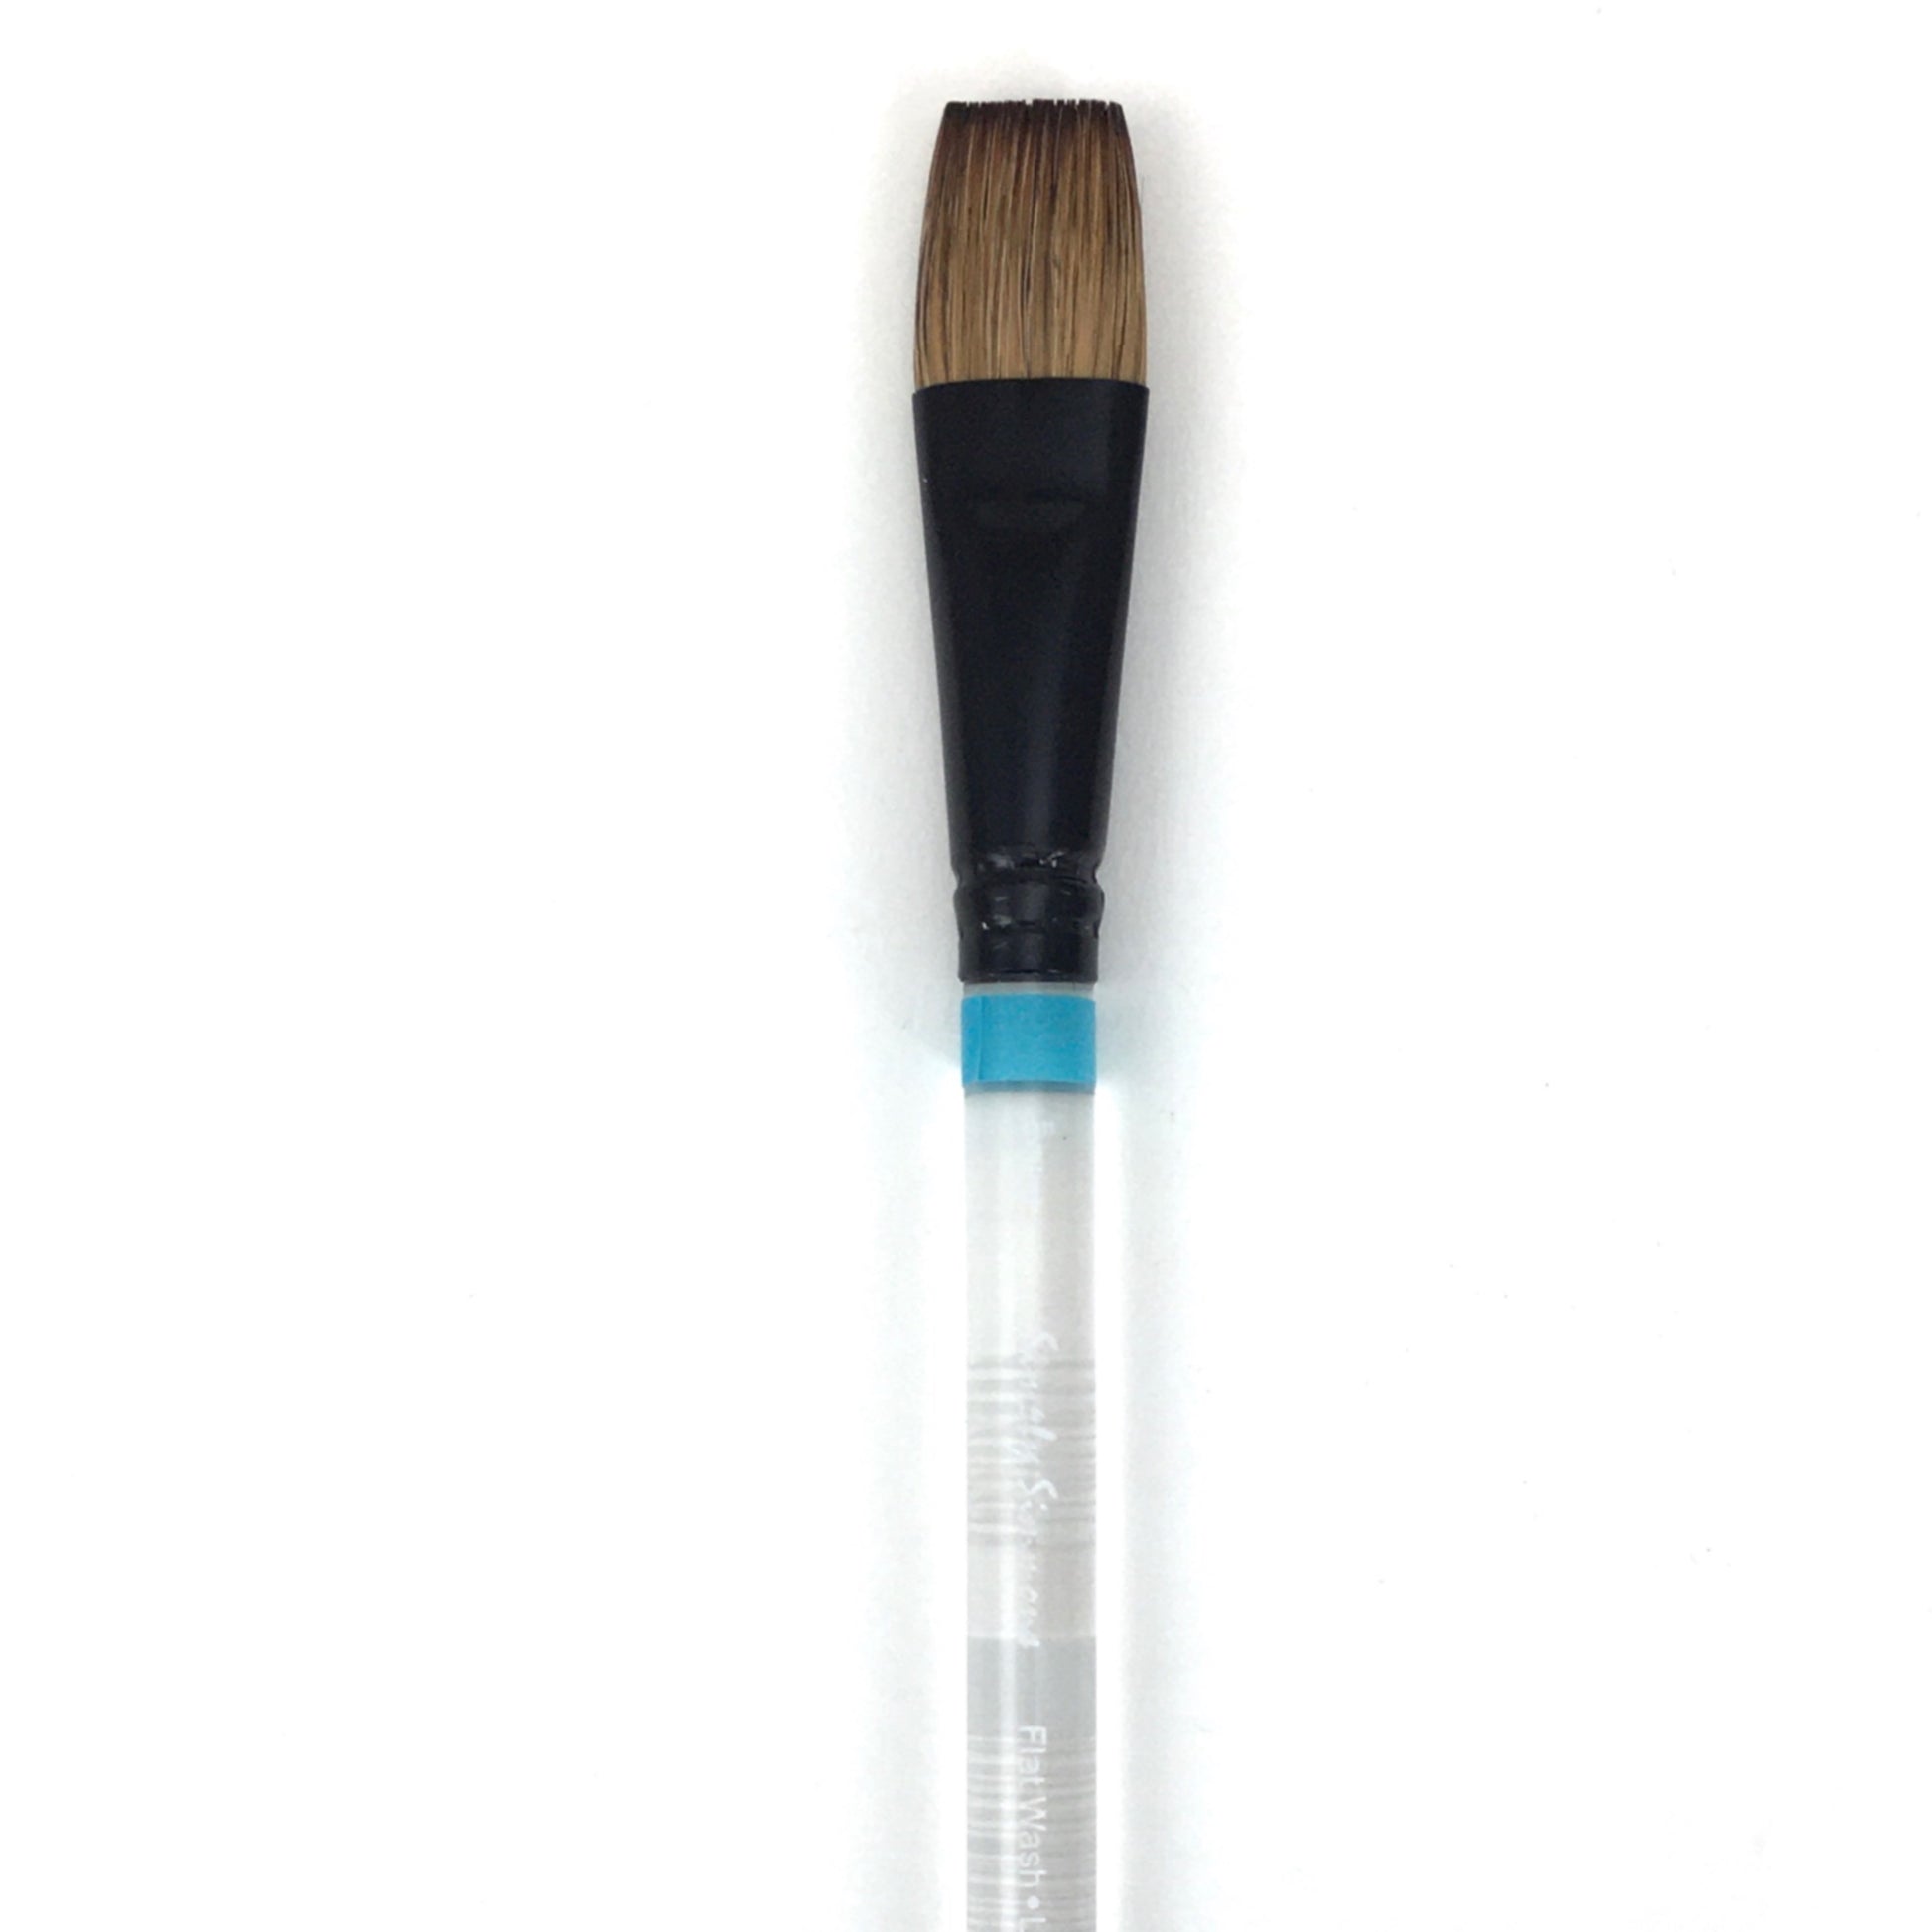 Simply Simmons Watercolor Brush - Short Handle - Flat Wash / - 3/4 inches / - natural by Robert Simmons - K. A. Artist Shop